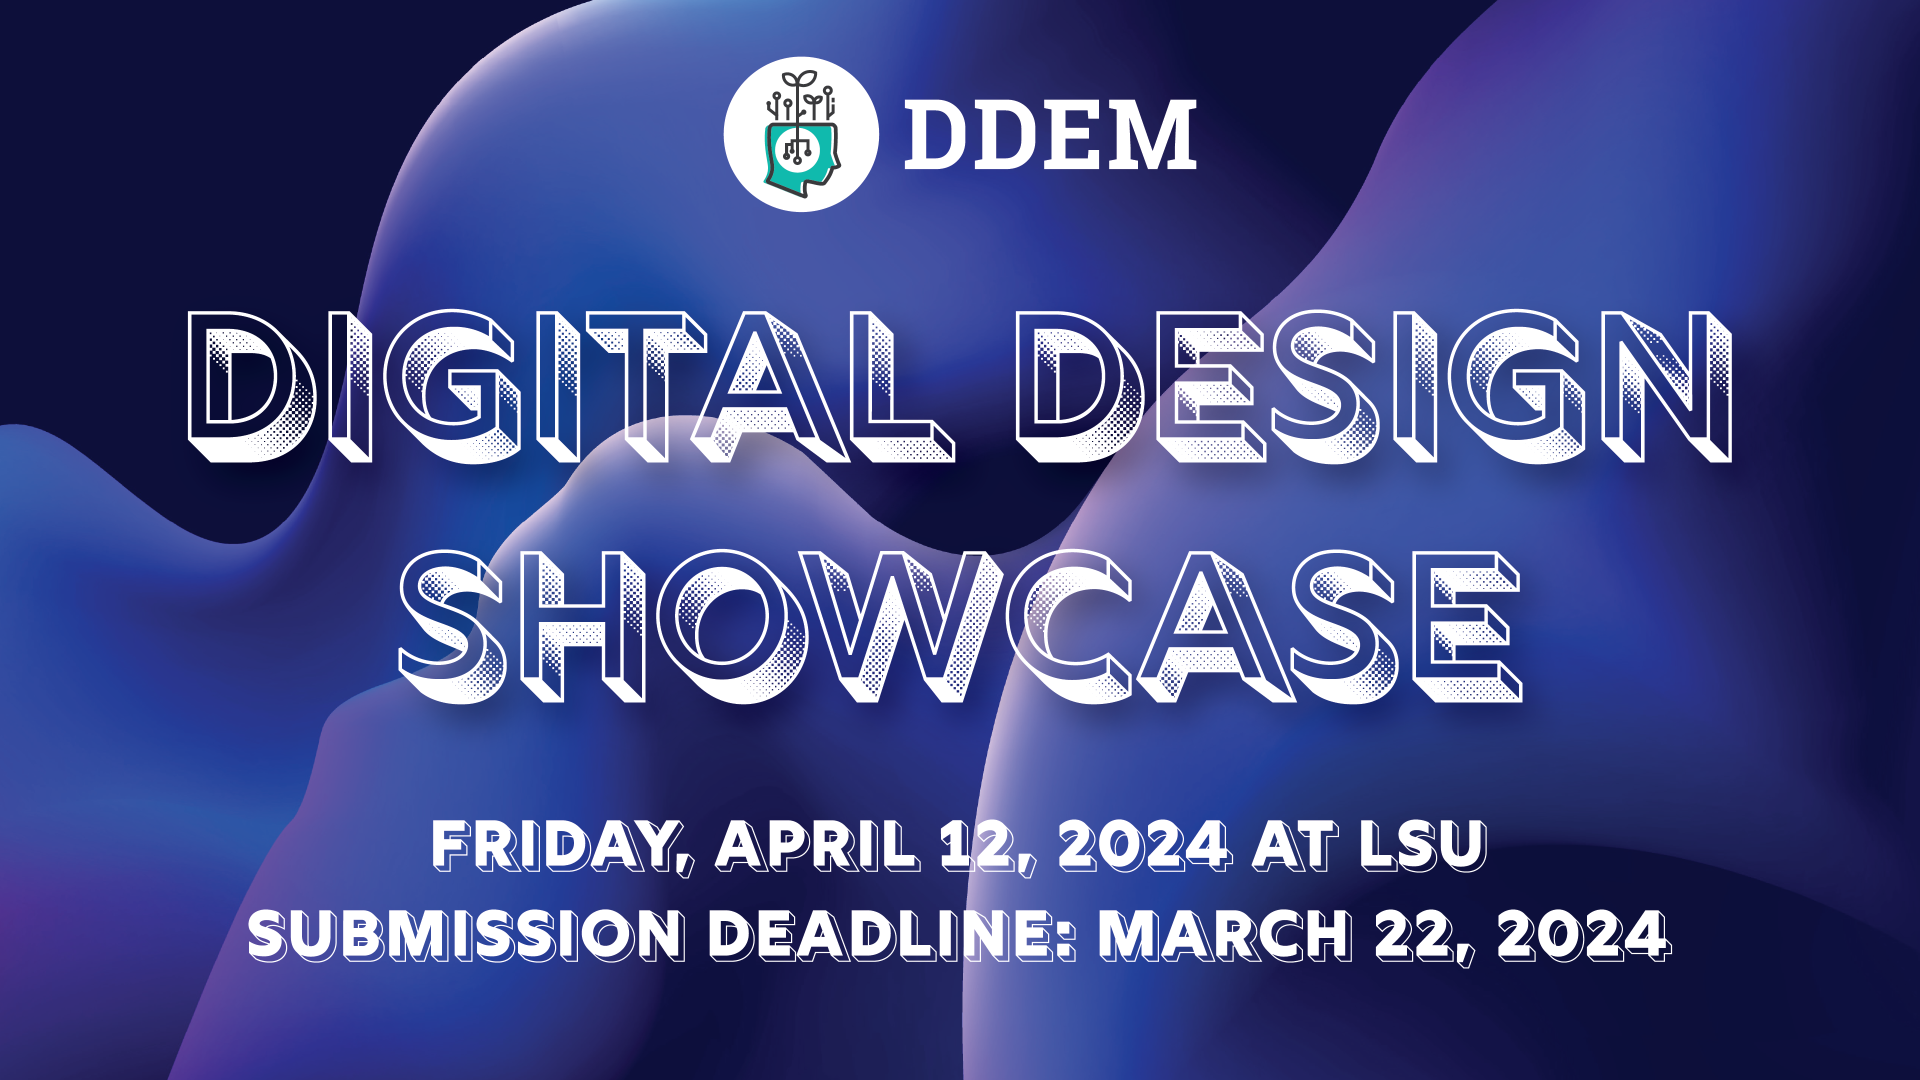 Digital Design Showcase is Friday April 12, 2024 at LSU. Submission deadline is March 22, 2024